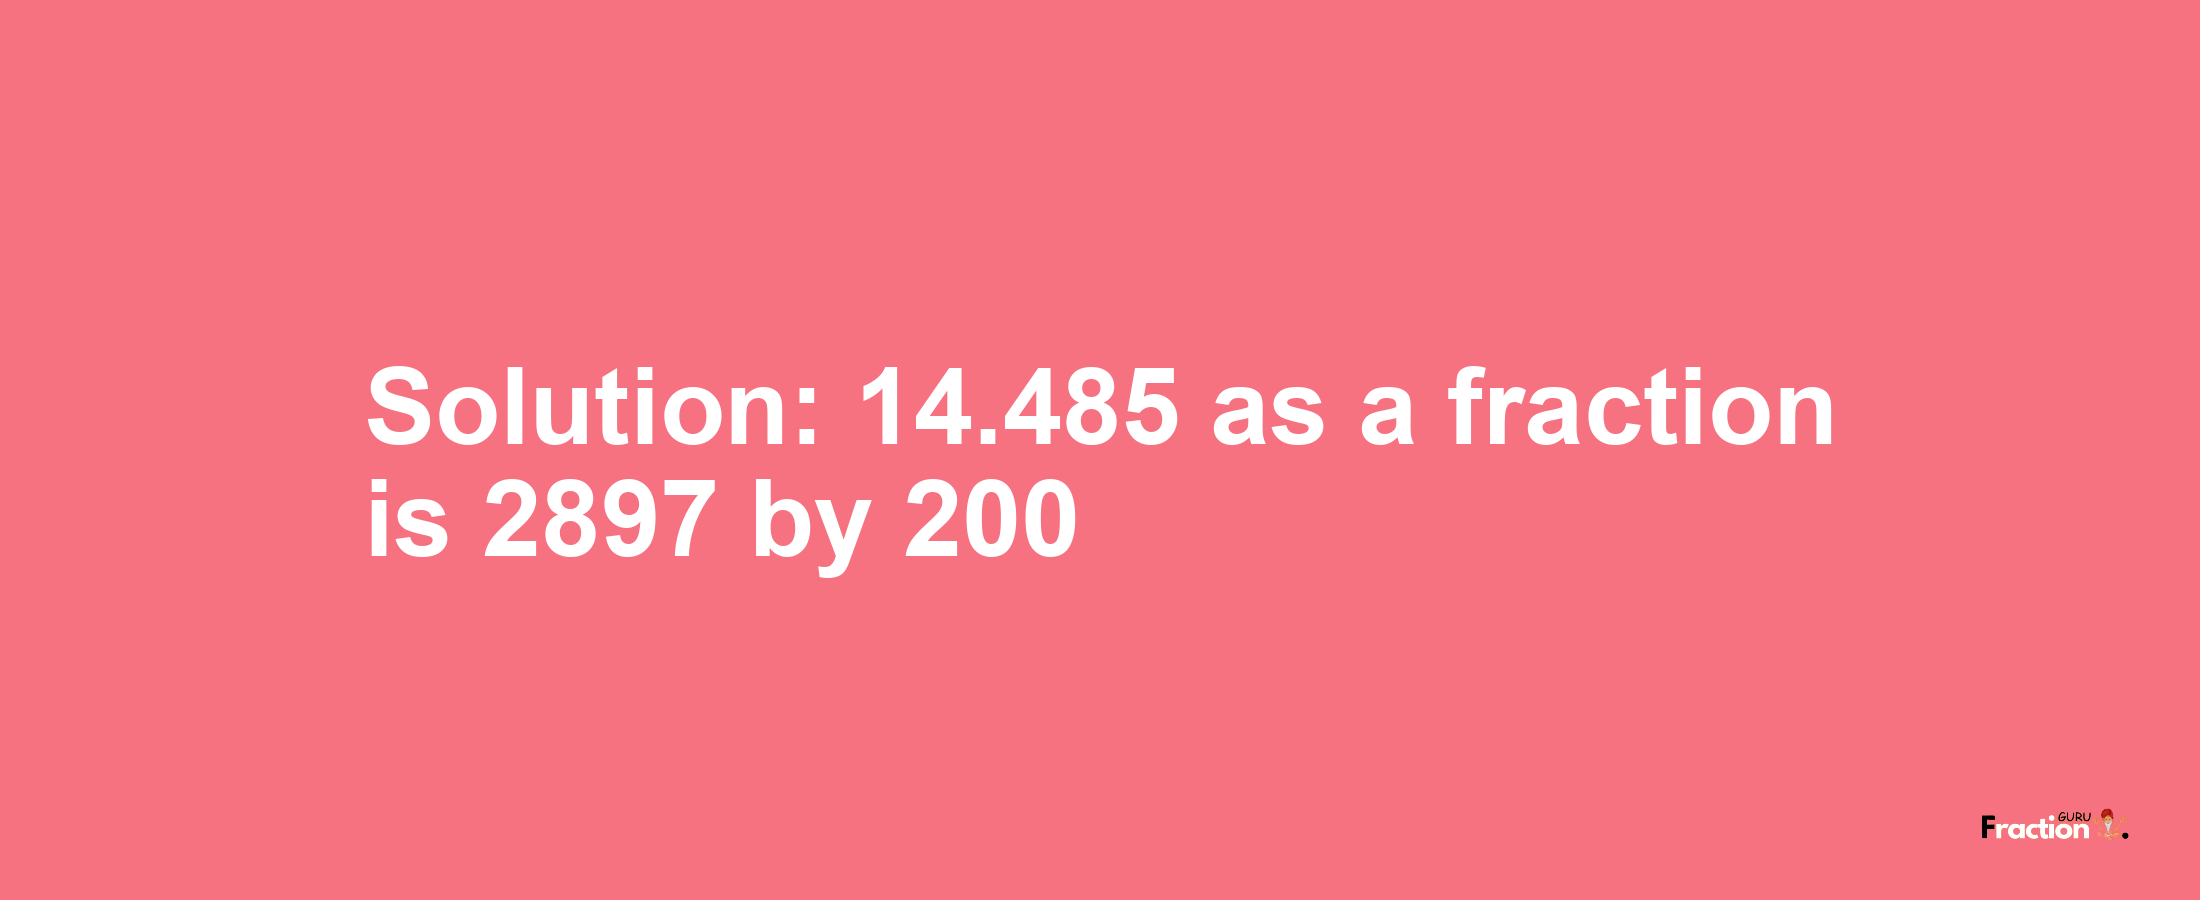 Solution:14.485 as a fraction is 2897/200